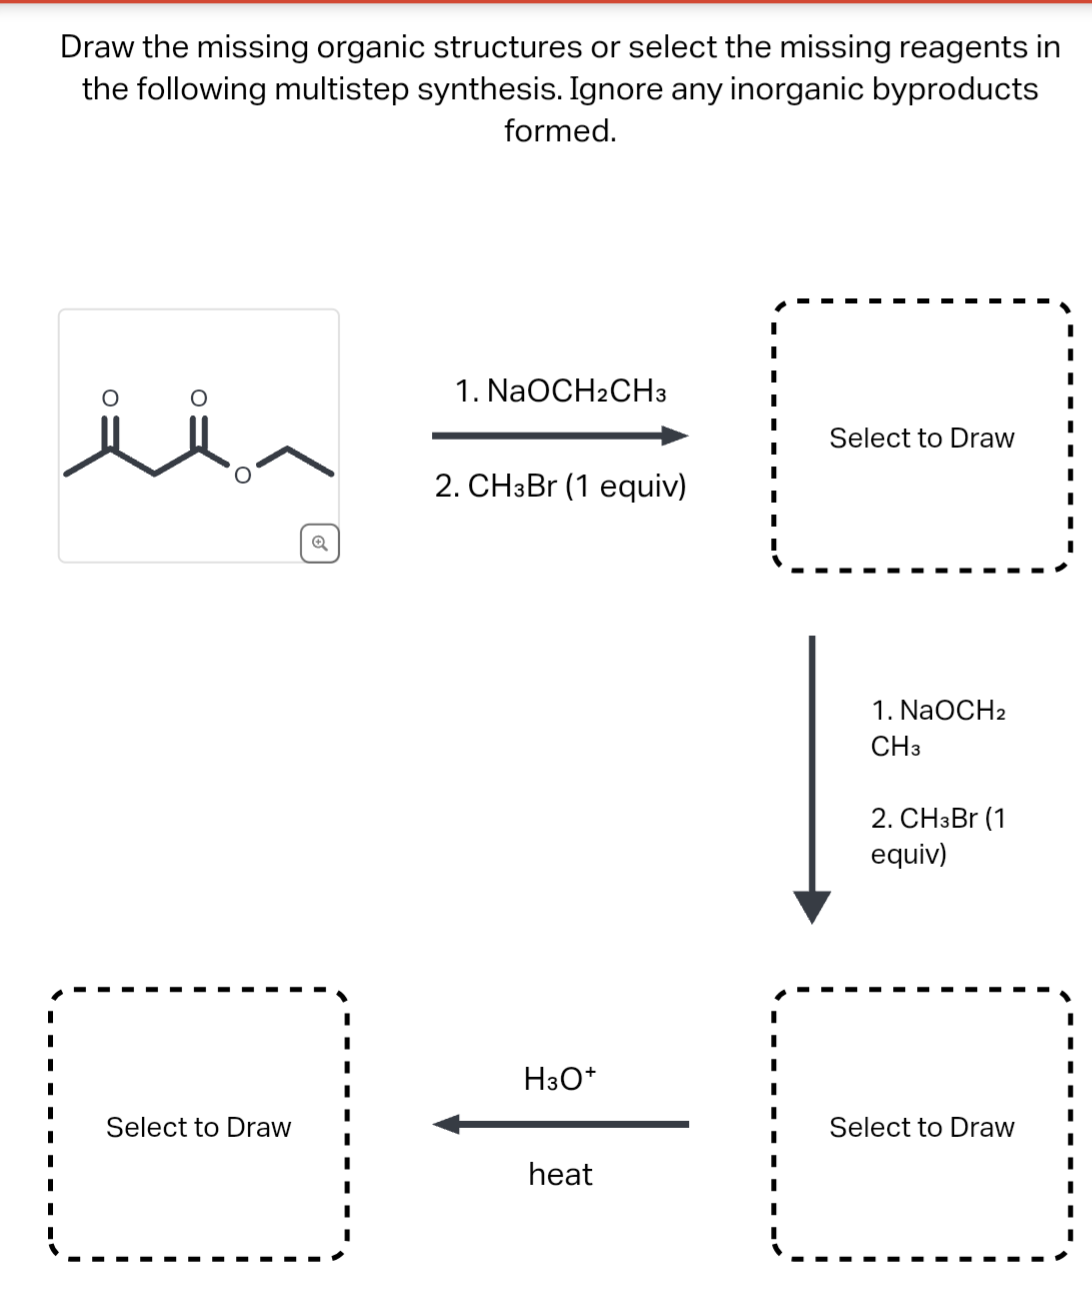 Draw the missing organic structures or select the missing reagents in
the following multistep synthesis. Ignore any inorganic byproducts
formed.
Select to Draw
Q
1. NaOCH2CH3
2. CH3Br (1 equiv)
H3O+
heat
Select to Draw
1. NaOCH2
CH3
2. CH3Br (1
equiv)
Select to Draw